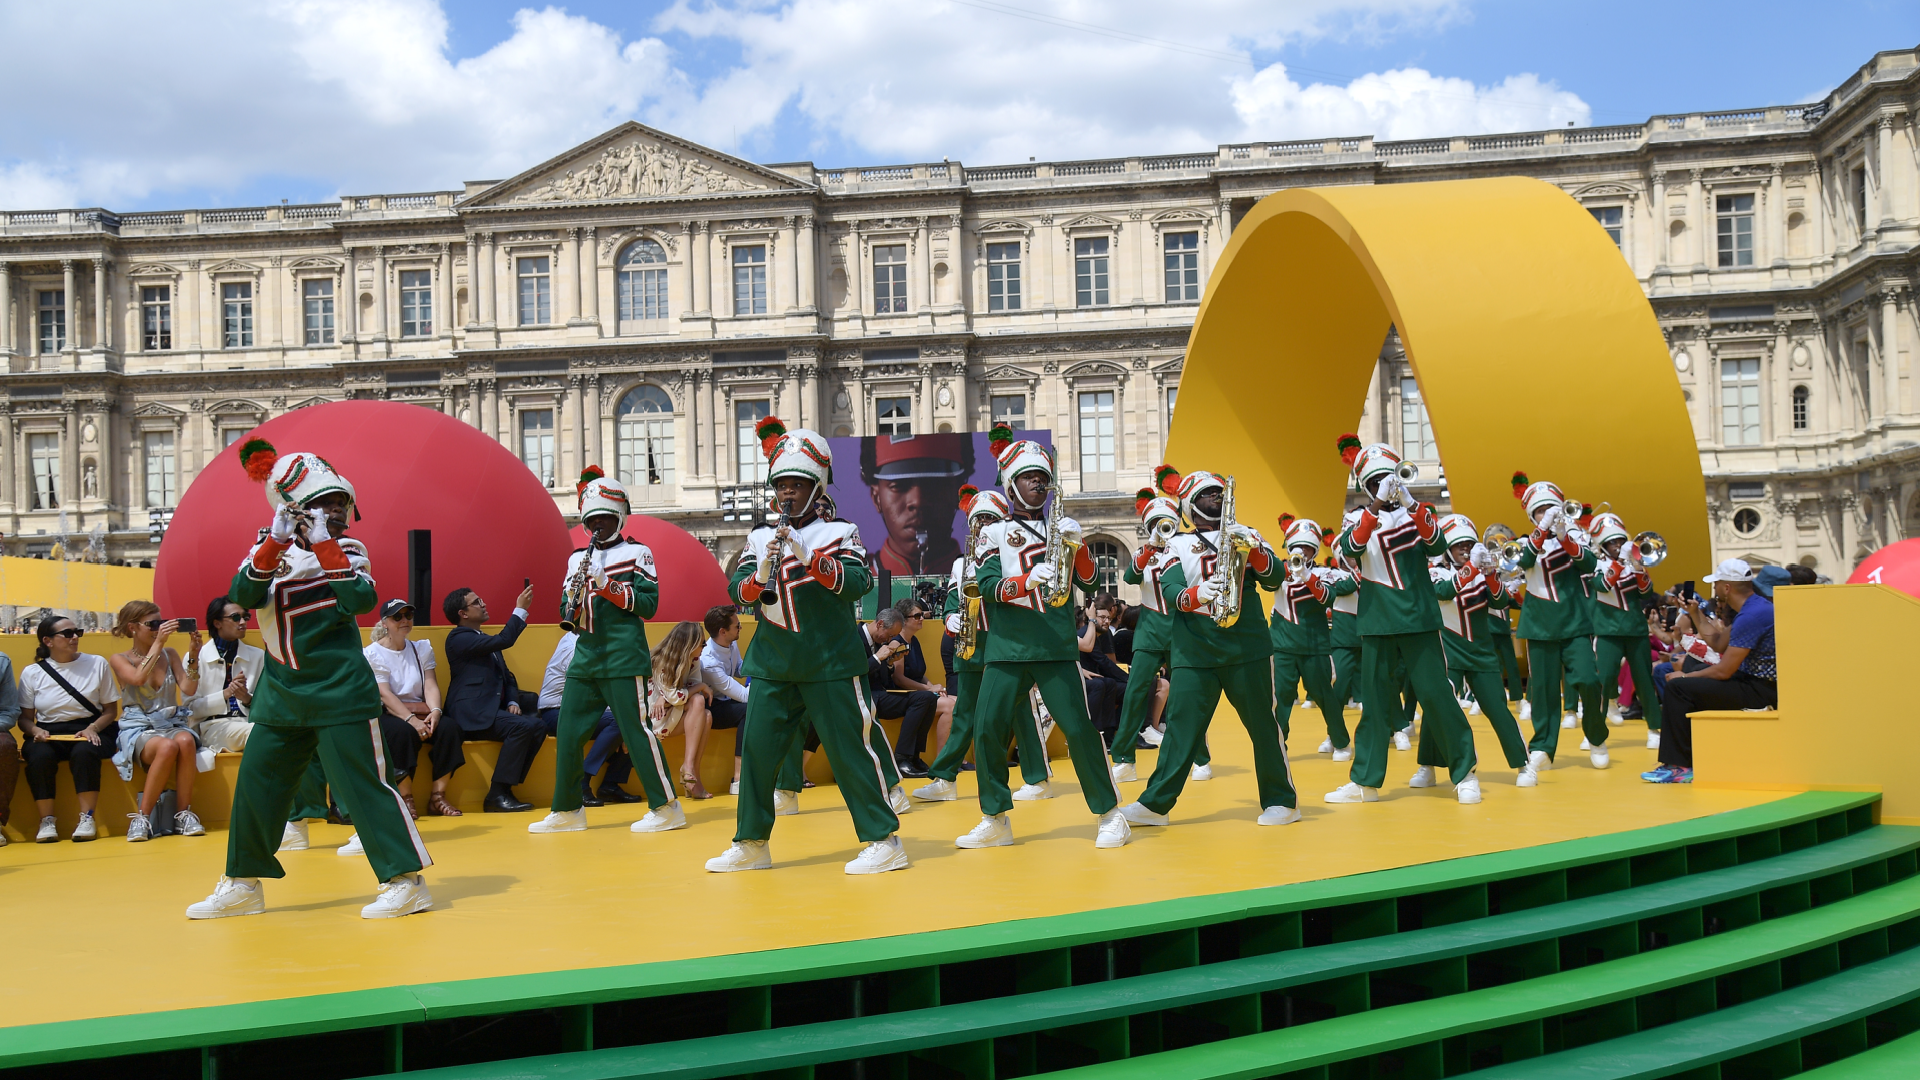 Louis Vuitton Men's Show Featured a Marching Band and Kendrick